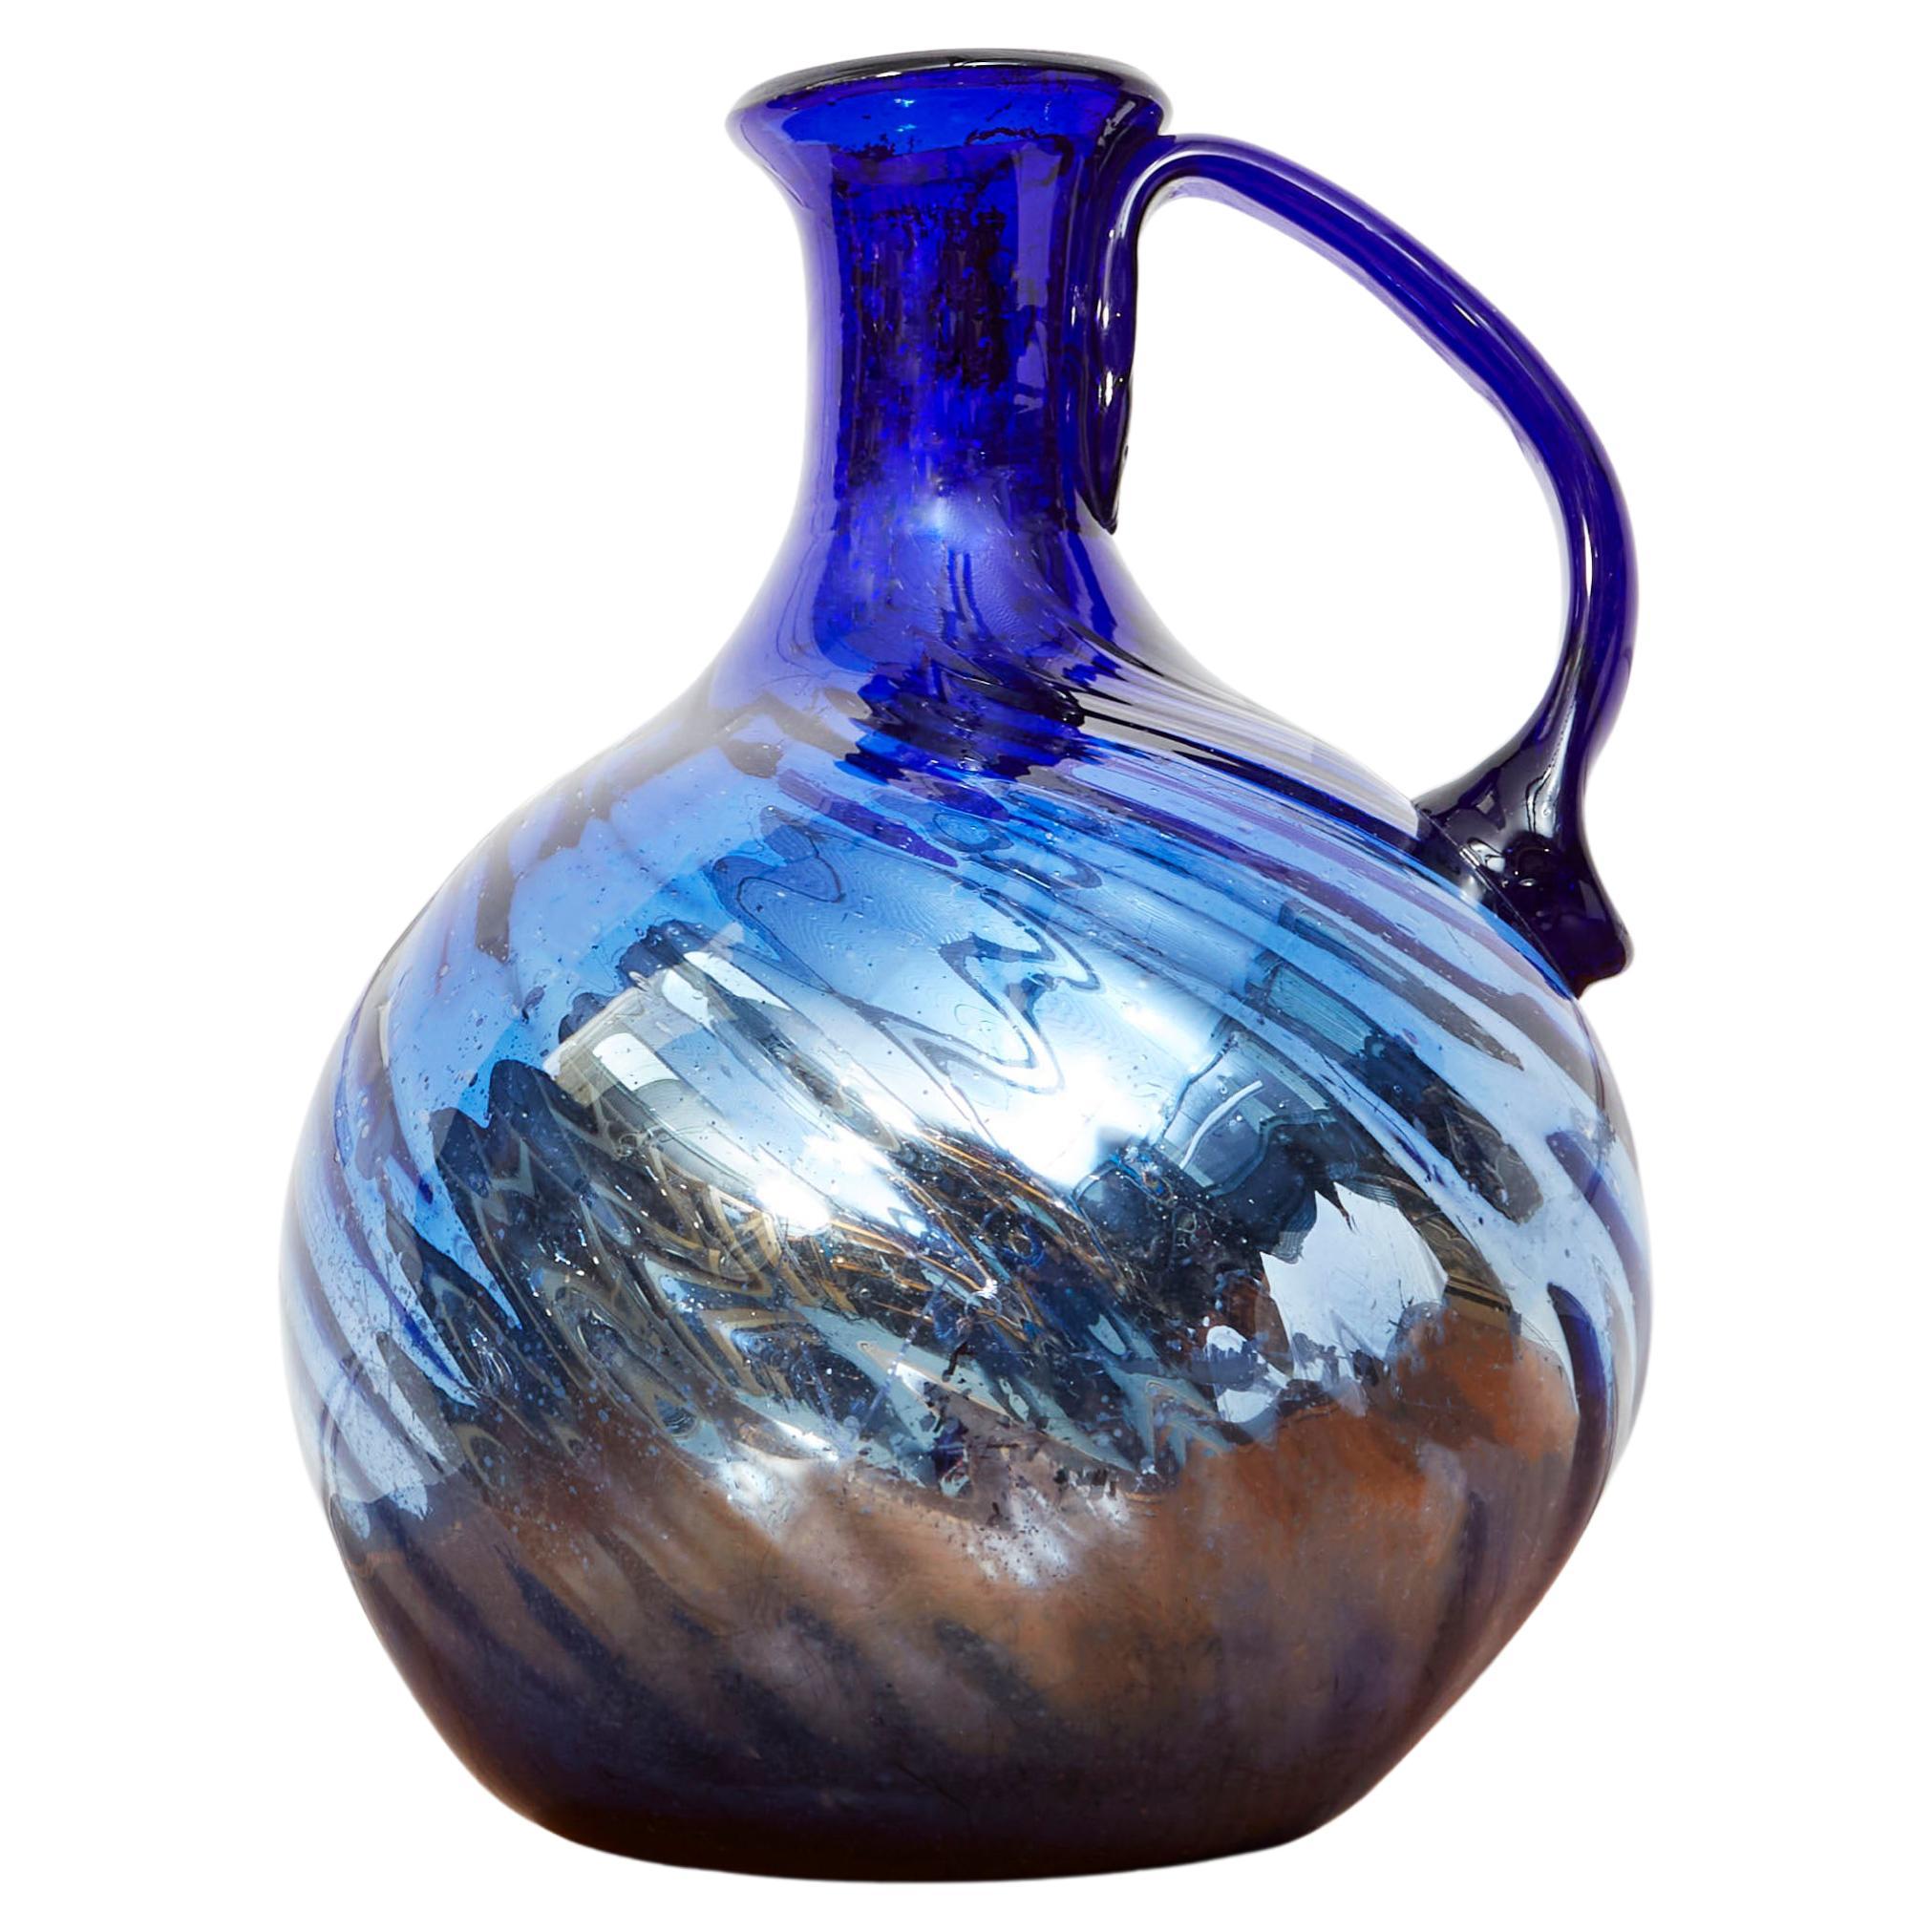 A spectacular wrythen moulded blue and mercury glass jug with spherical body, tapered neck and with single loop handle.

Continental, Early Twentieth Century.